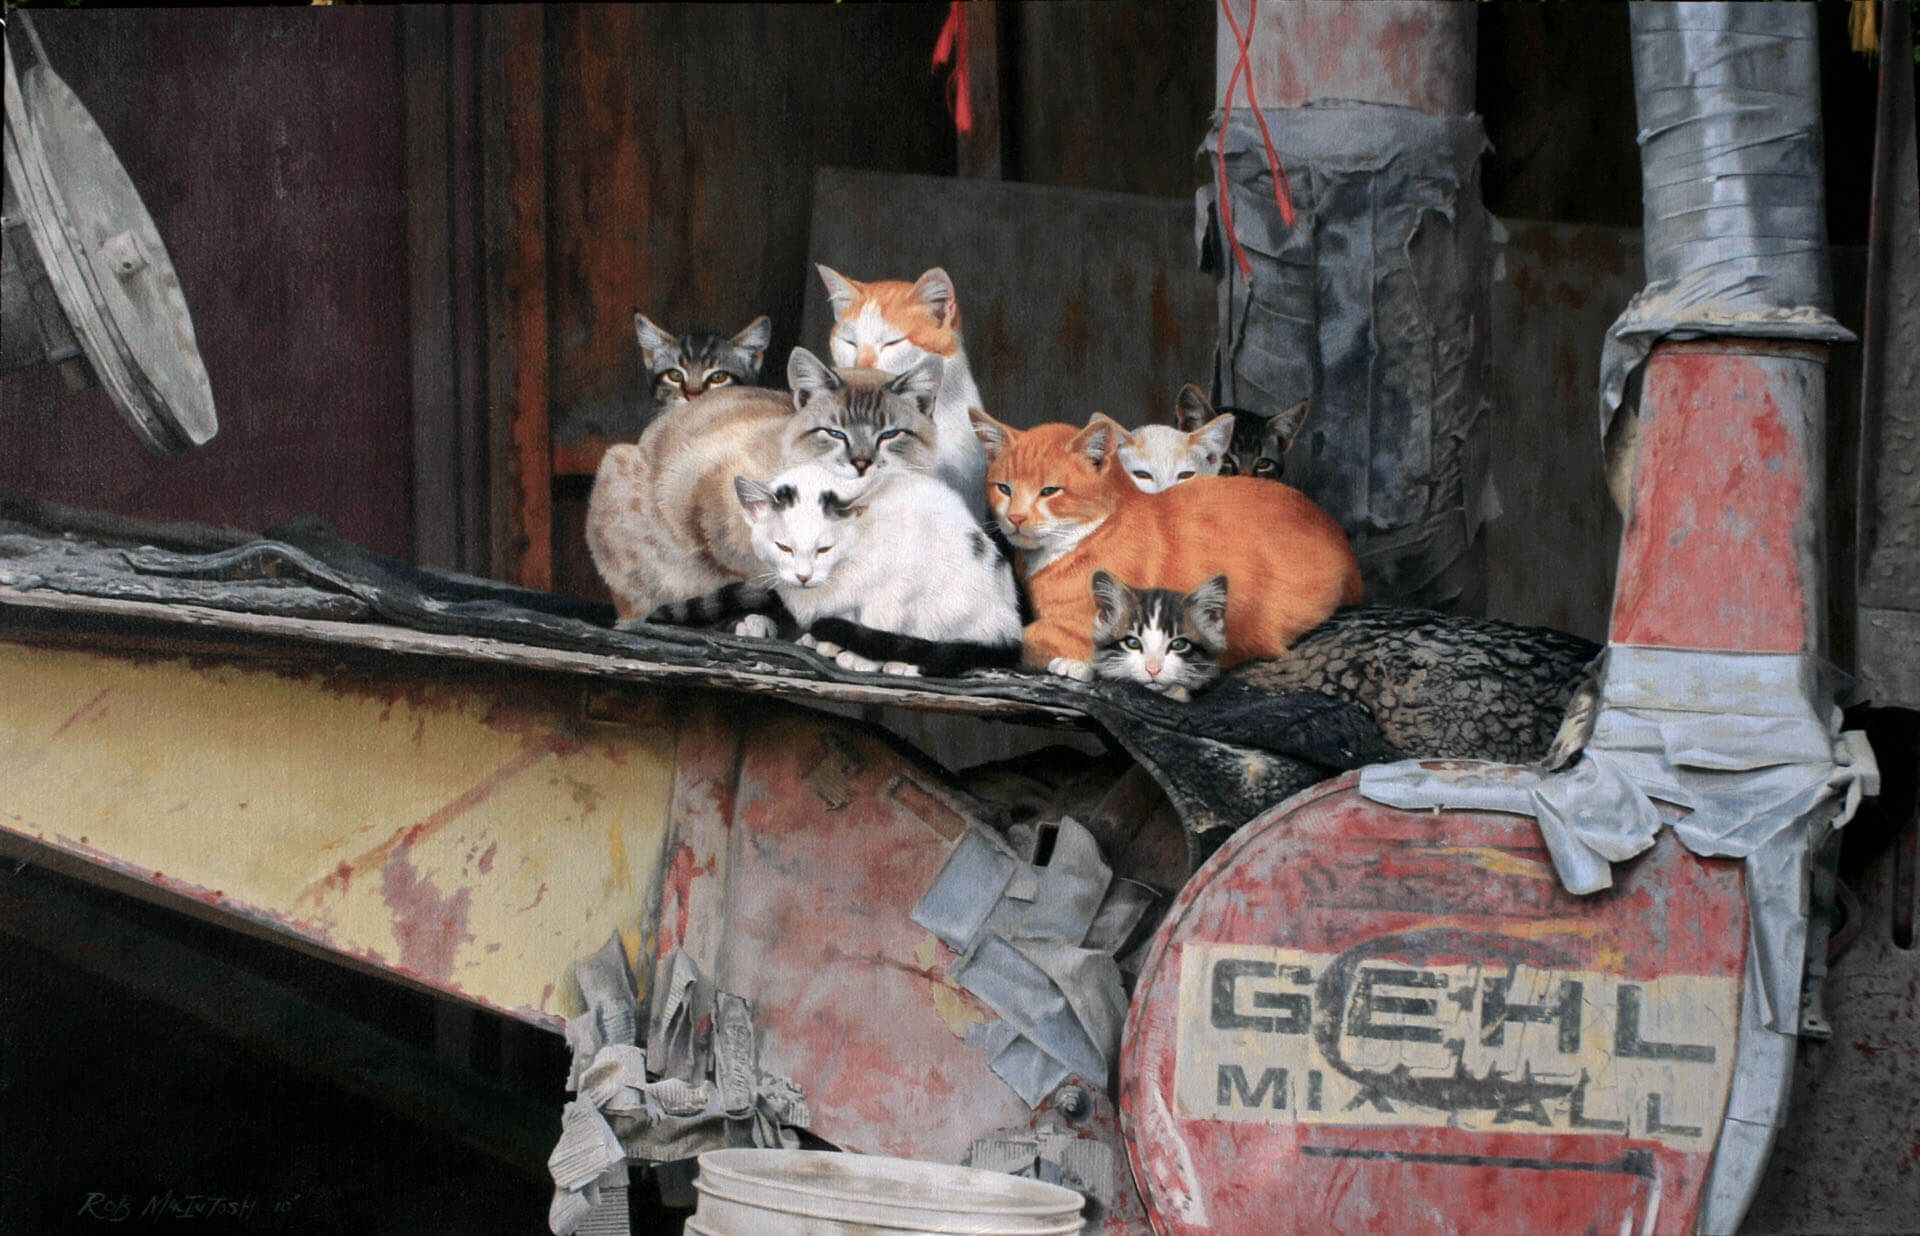 Photorealistic painting of cats in a junk yard